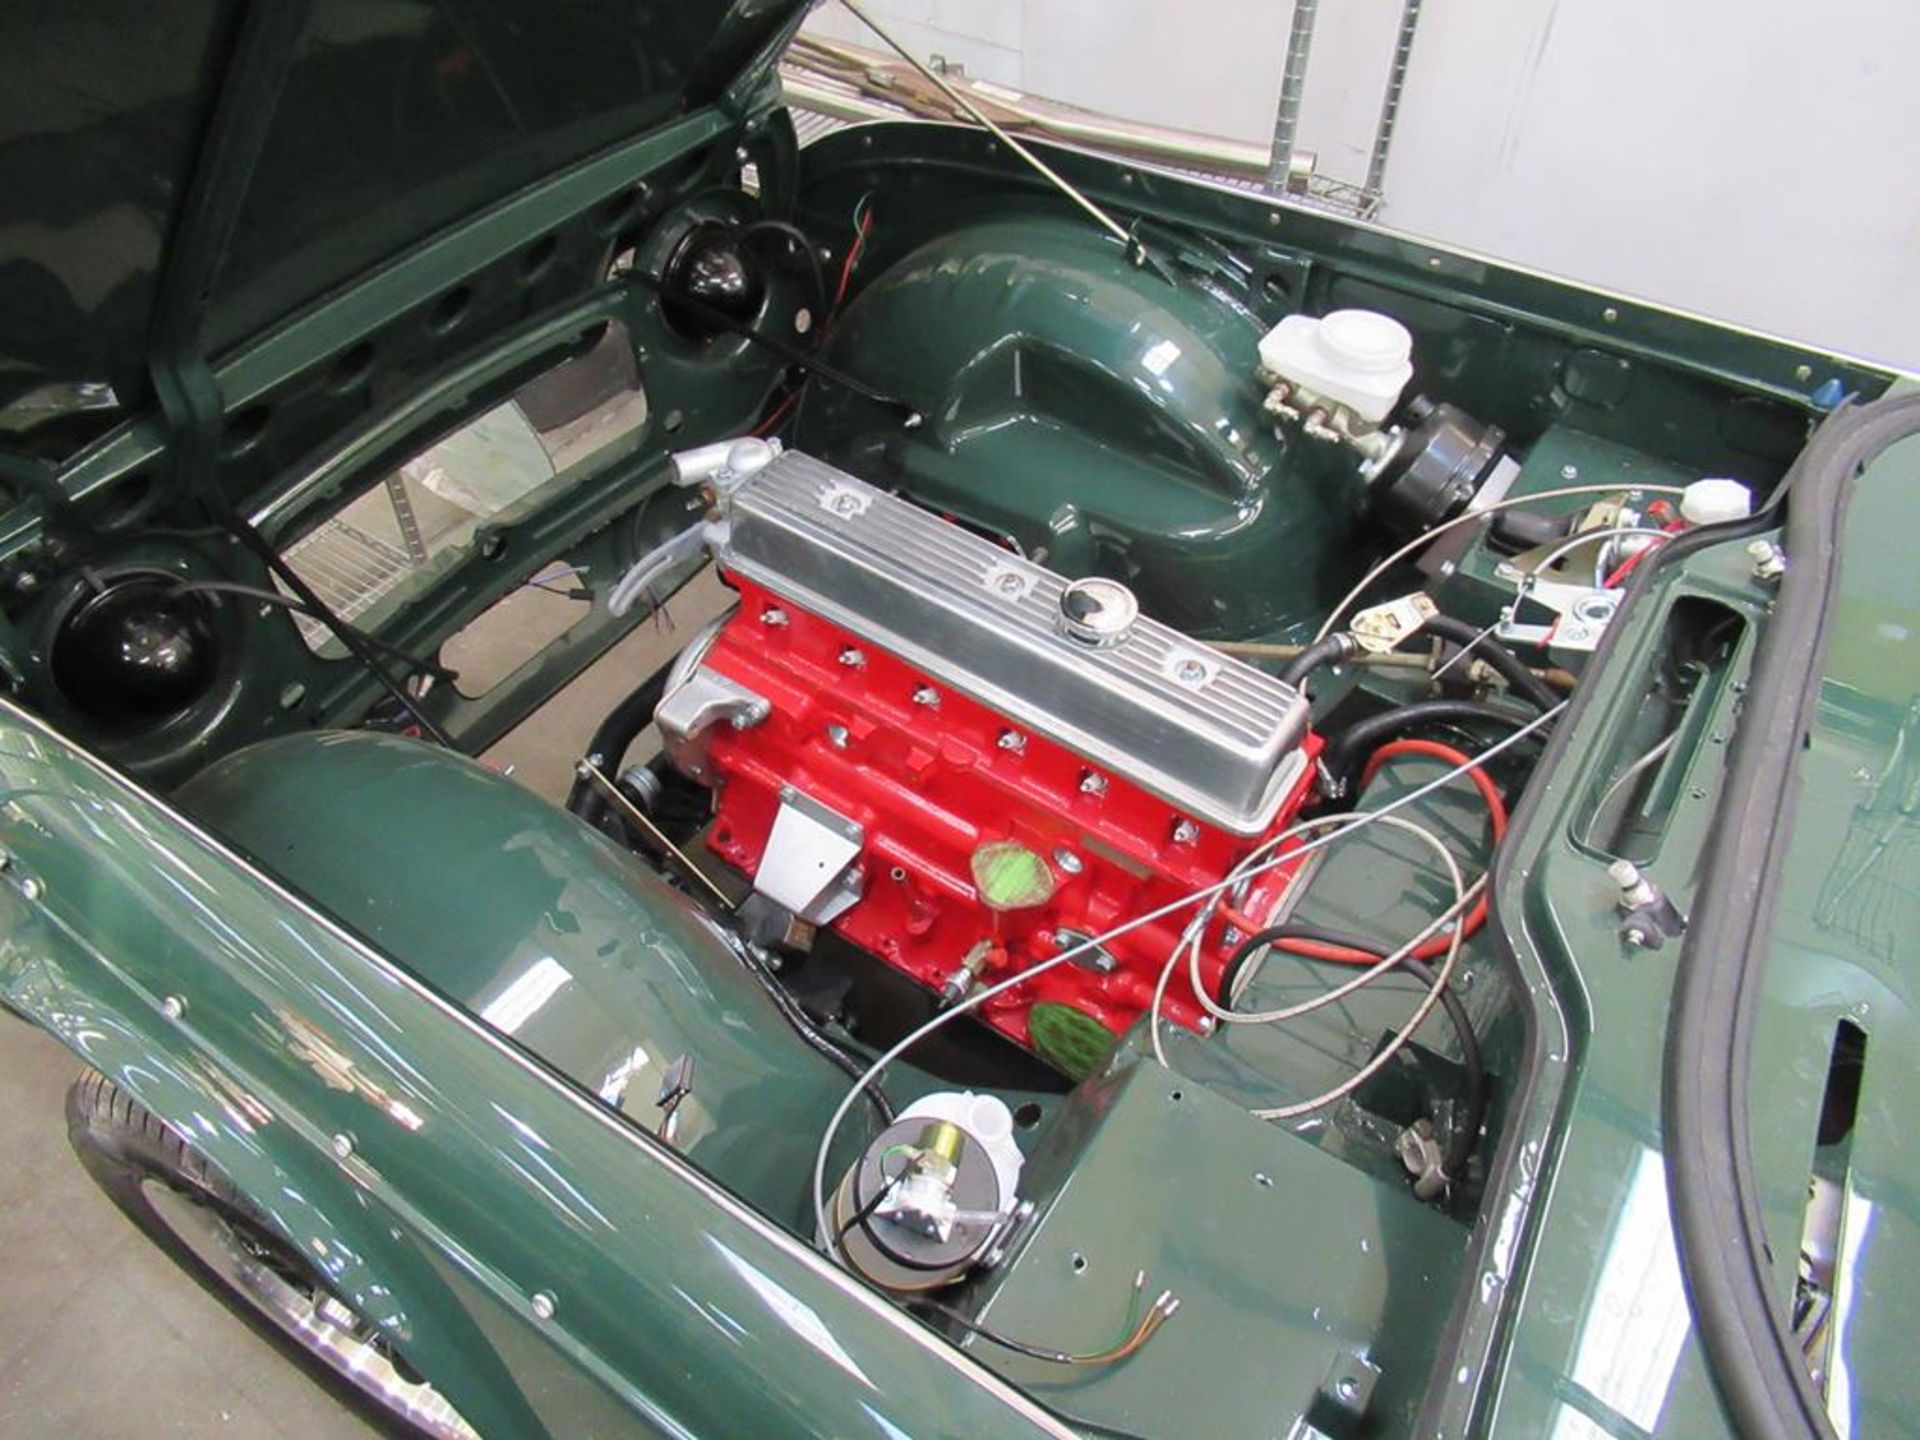 Partly restored 1968 Triumph TR5 PI fitted with Steel Engine - Image 6 of 44